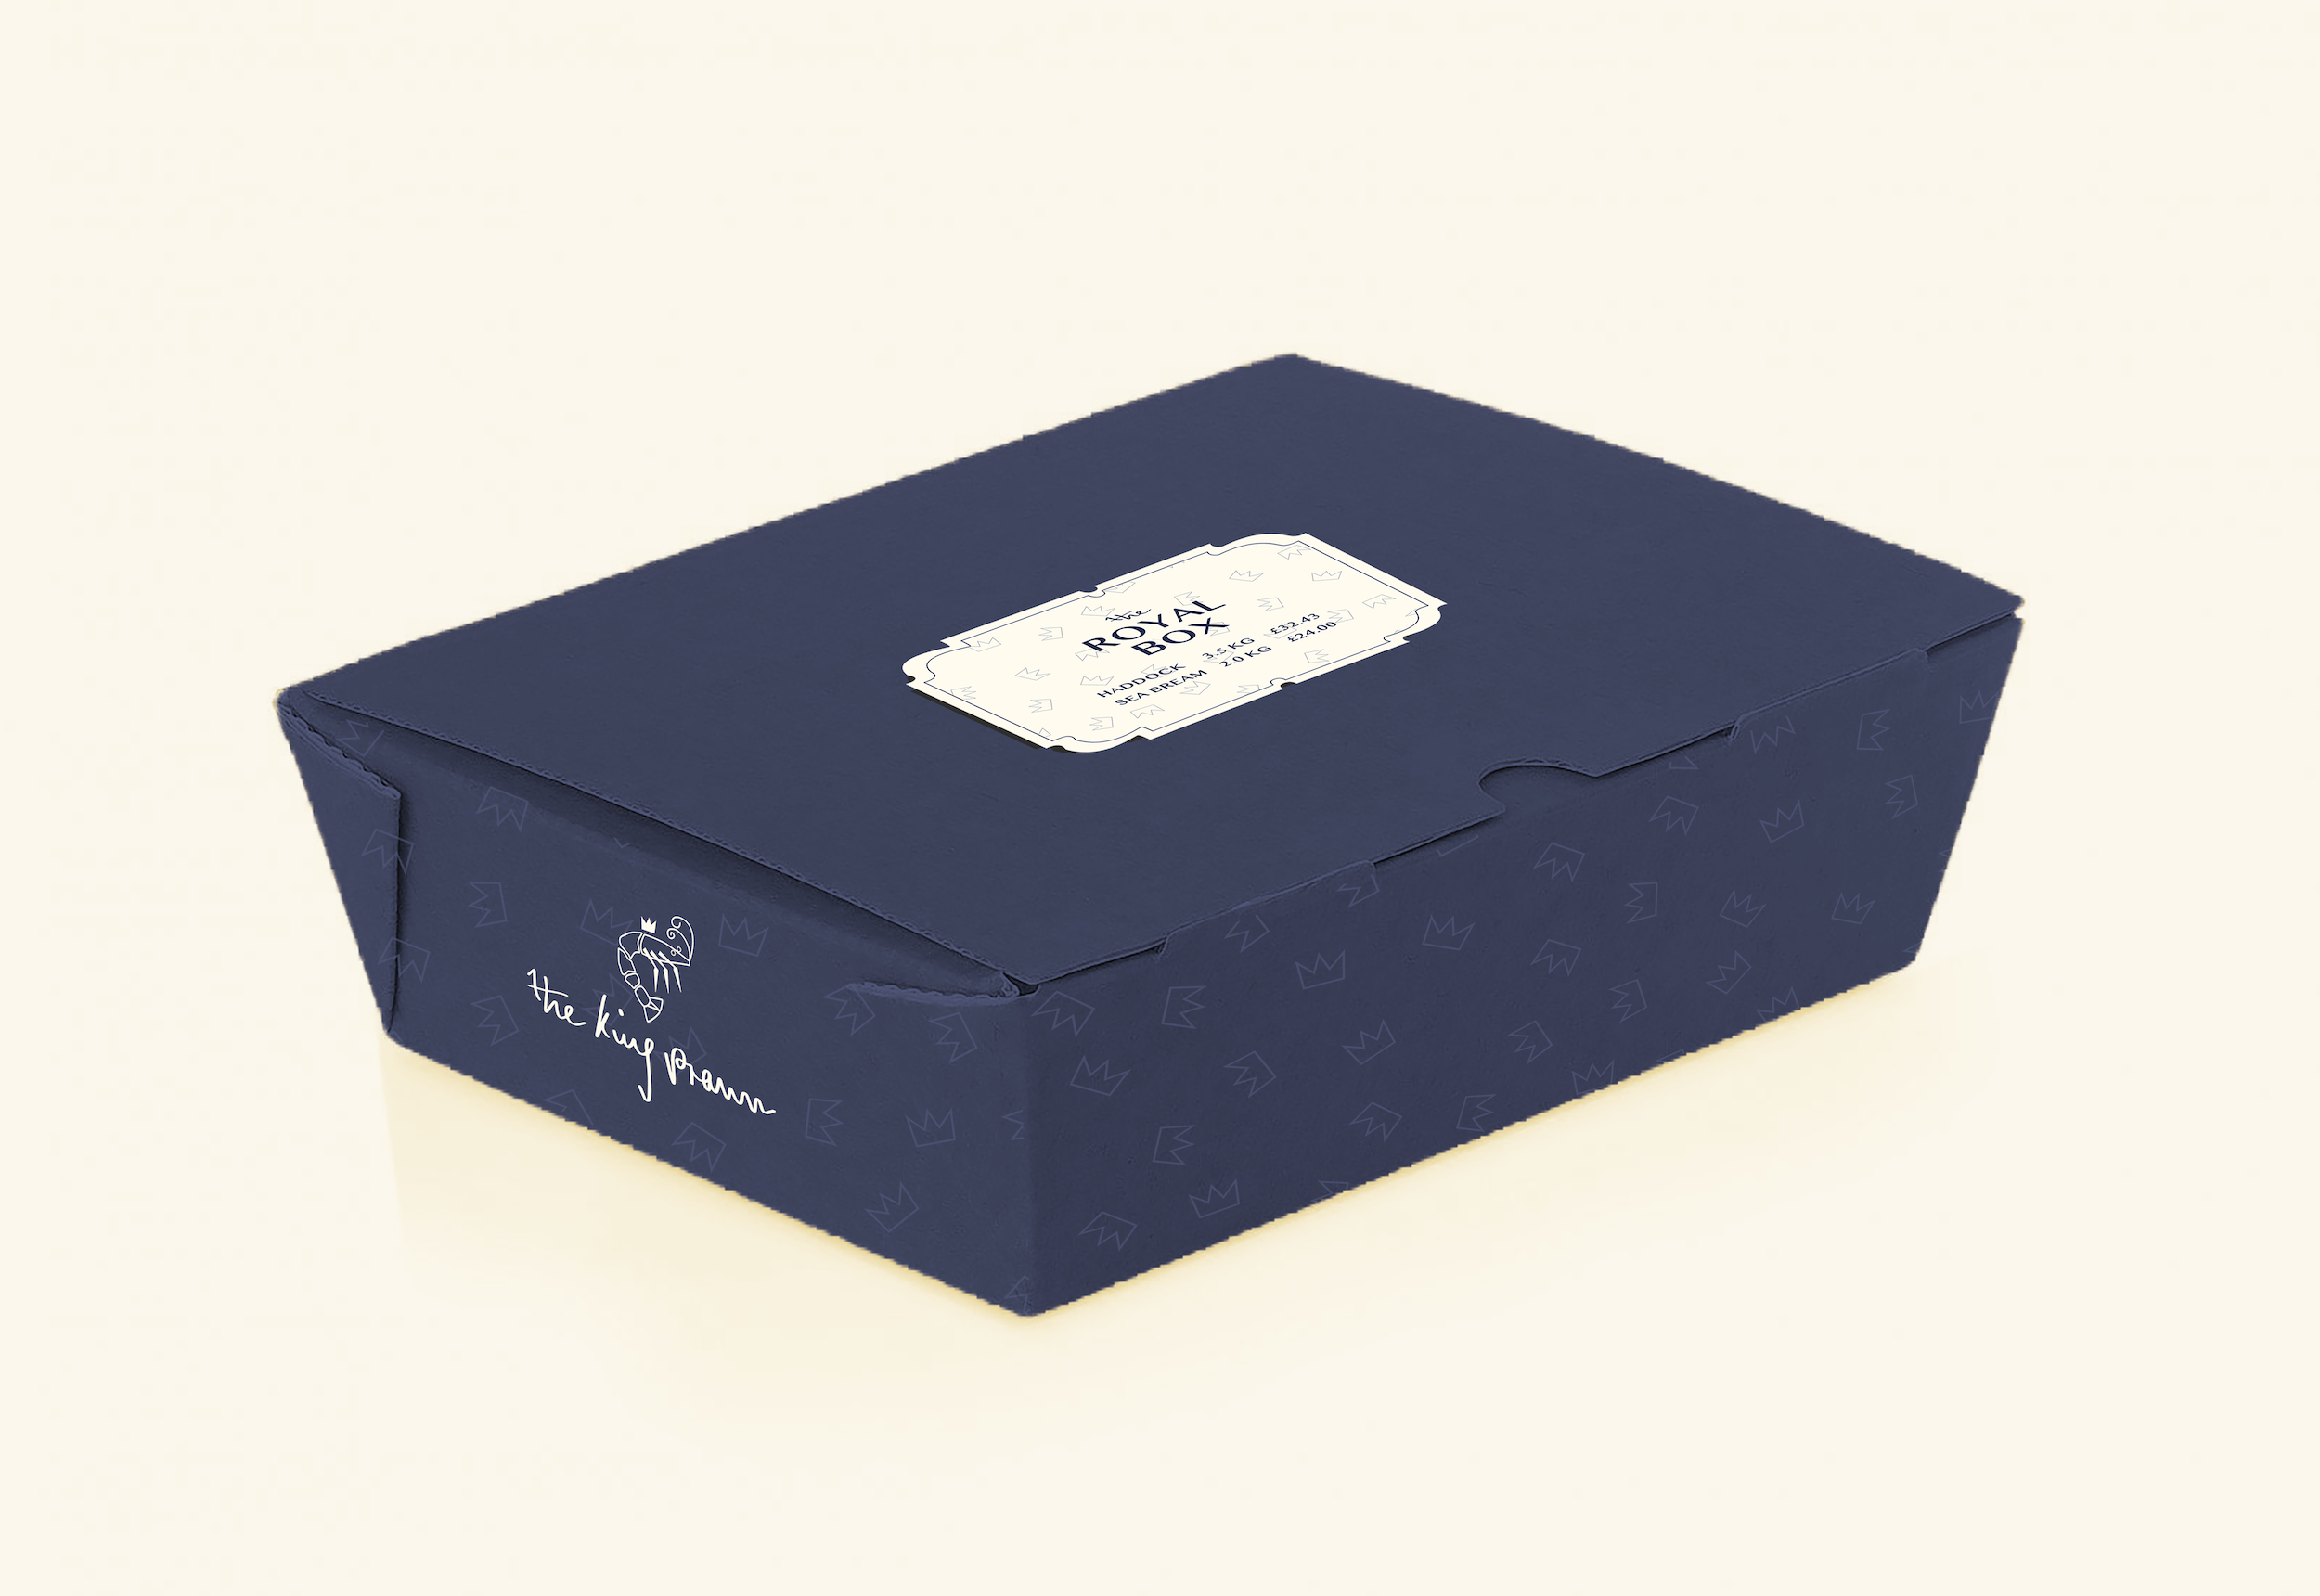 A deep blue takeaway box decorated with crowns, with a label that says 'The Royal Box'.